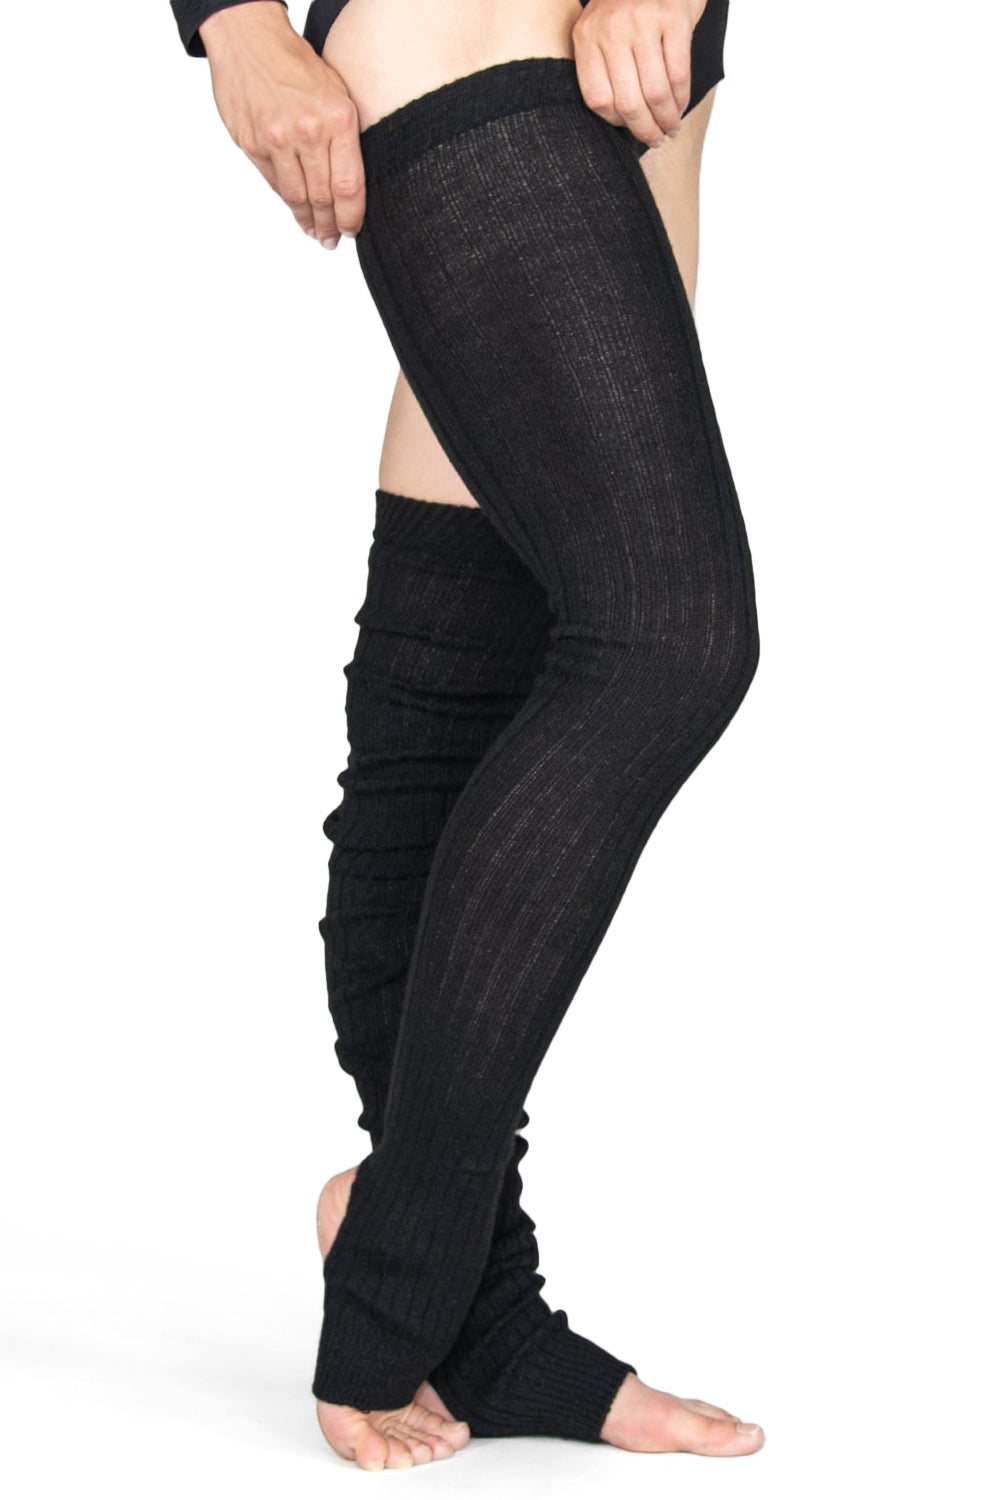 BODY WRAPPERS 92 48" EXTRA LONG STIRRUP LEG/TIGHT WARMERS